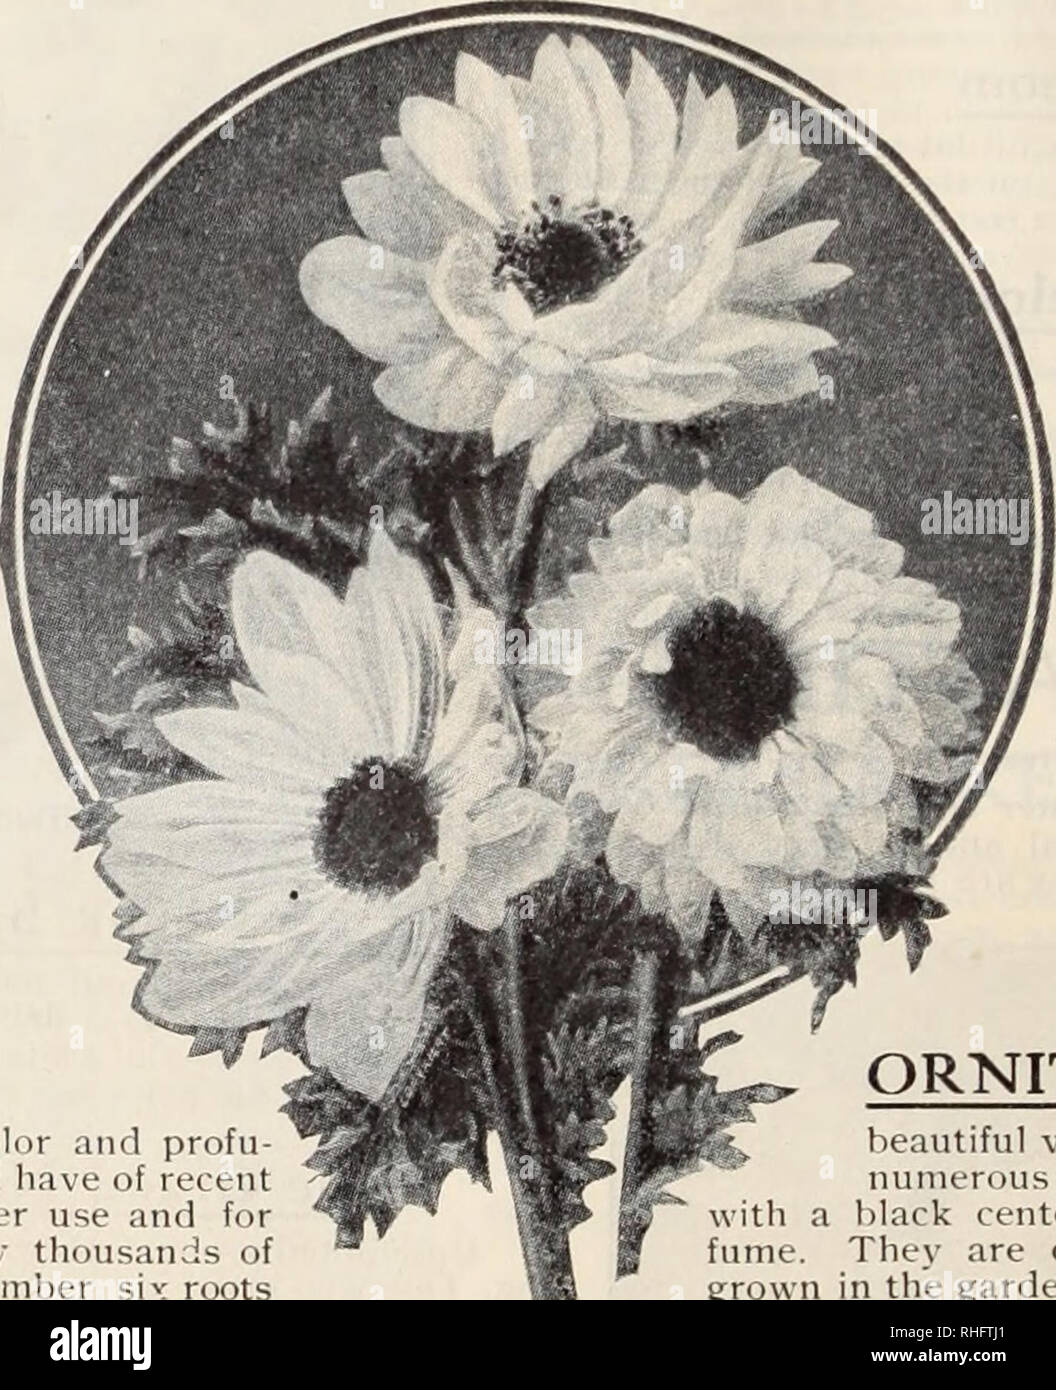 . Boddington's quality bulbs, seeds and plants / Arthur T. Boddington.. Nursery Catalogue. Arthur T.Boddin^'ton, 342 West 14th St.. New York City Miscellaneous Bulbs for Indoor Flowering ALLIUM Neapolitanum. An excellent forct-r for winter-flowering, with immense trusses Uoz. of white llowers |o 15 Luteum. Yellow 05 Roseum. Pink 25 Azureum. Blue i 00 100 $1 00 50 I 25 6 50 In order to obtain fine specimens of Ama- ryllis the following; method should he fol- AMARYLLIS. lowed: On receipt of the bulbs in the autumn they should be placed where they will be always sli,i;litlv uioi.st and warmâunder Stock Photo